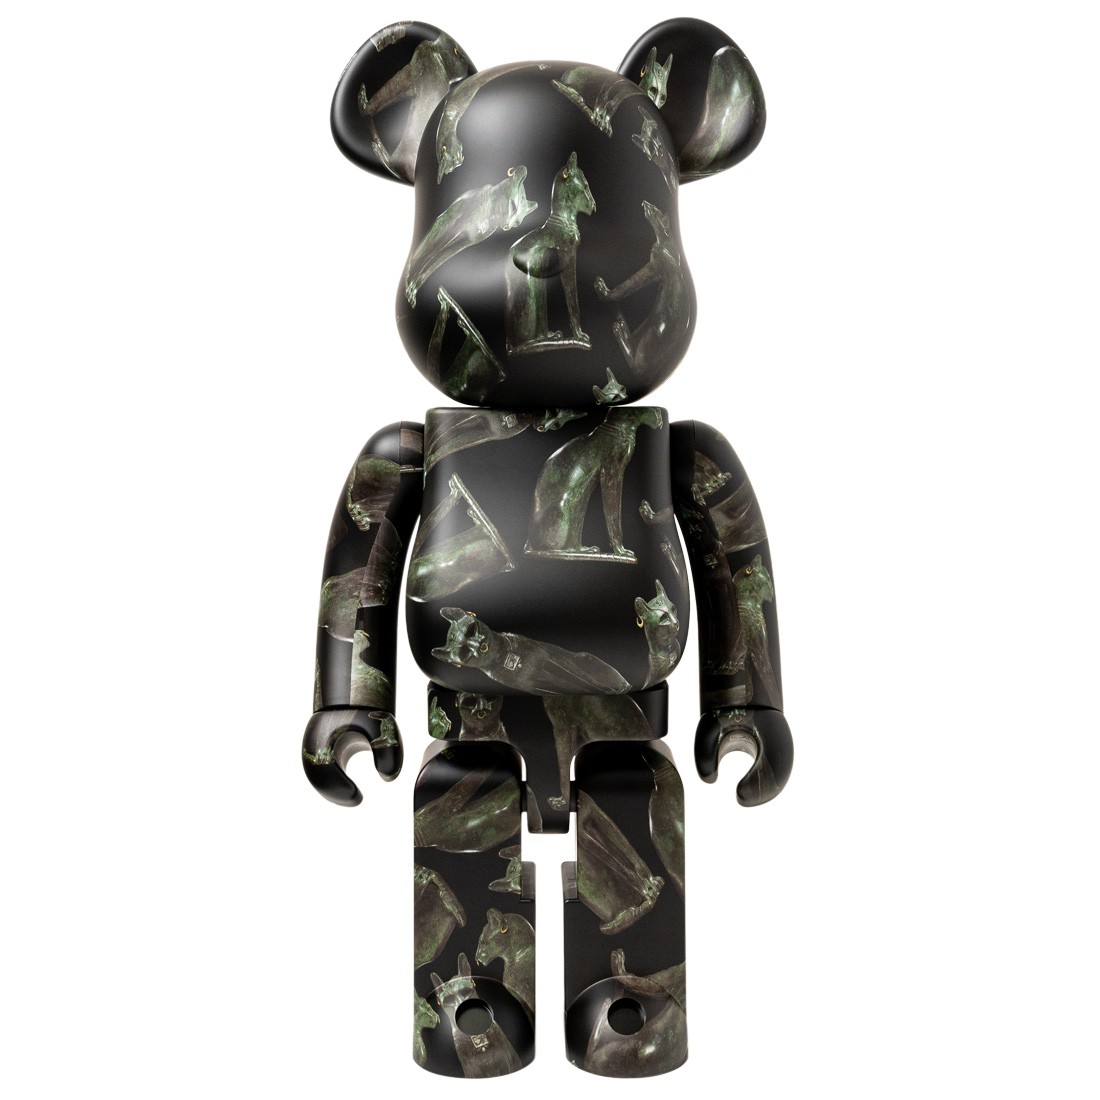 Medicom The british months Museum The Gayer-Anderson Cat 1000% Bearbrick Figure (olive)